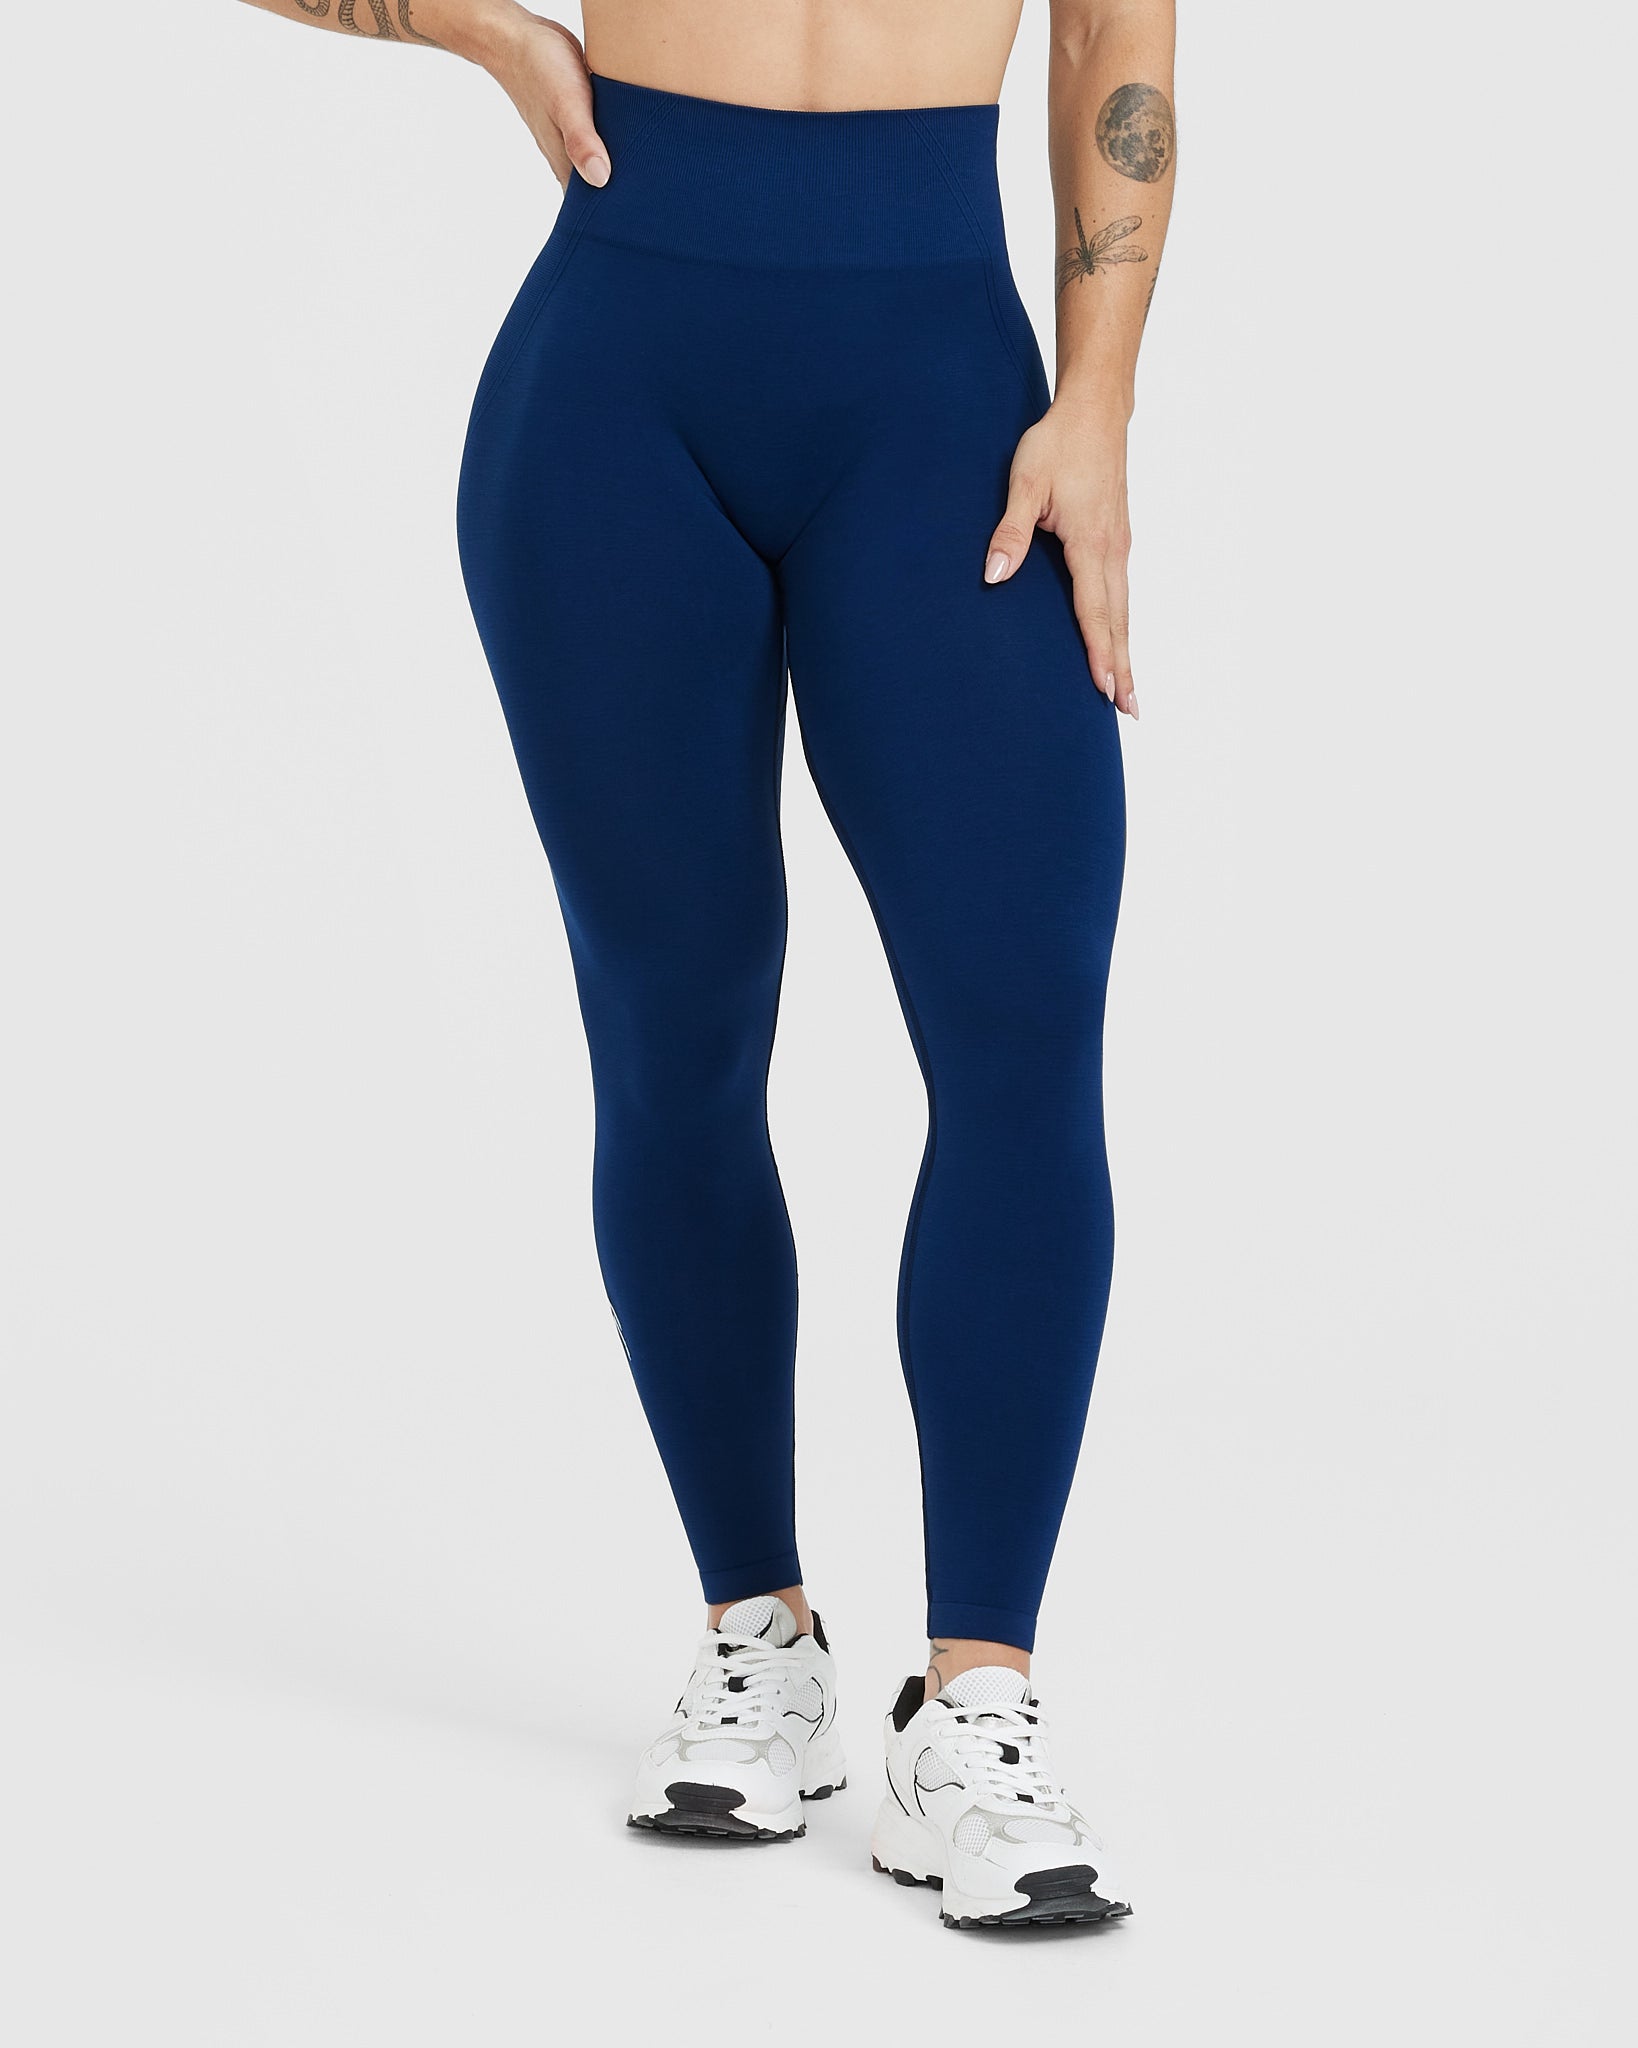 Oner Active Effortless Seamless Leggings Blue Size XS - $55 - From